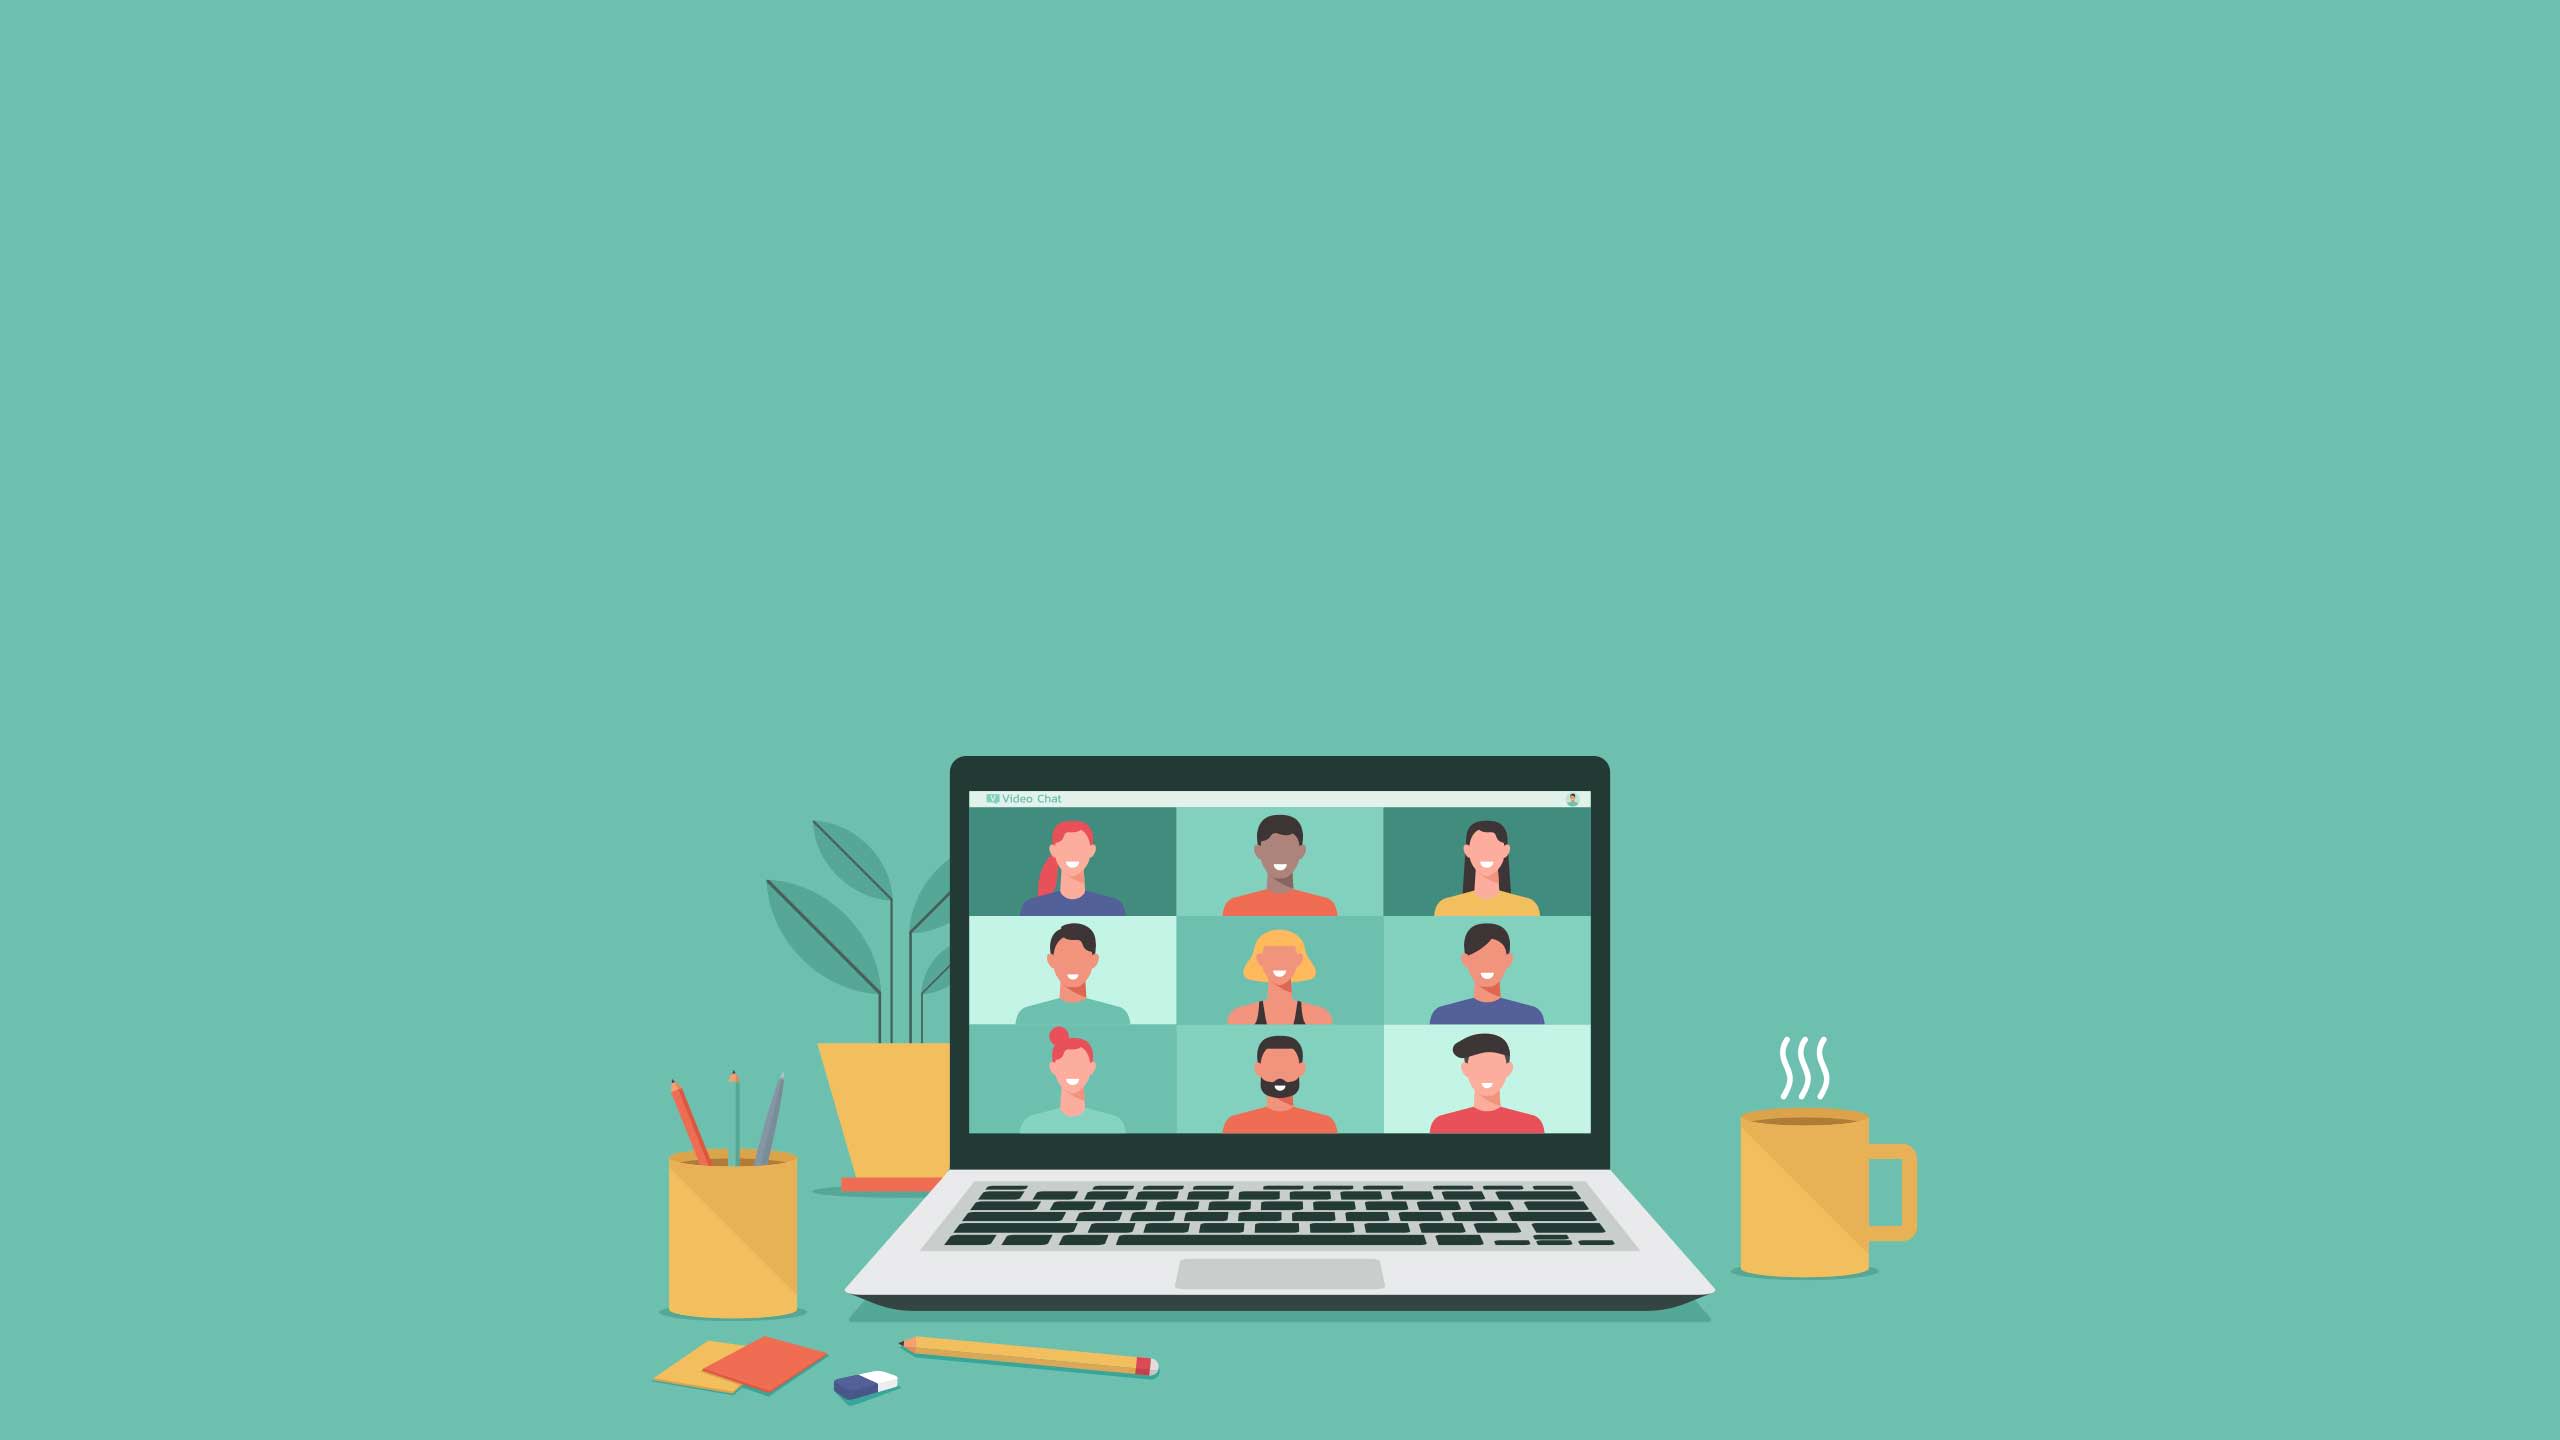 An illustration of people connecting together, learning or meeting online with video conference remote working on laptop computer.